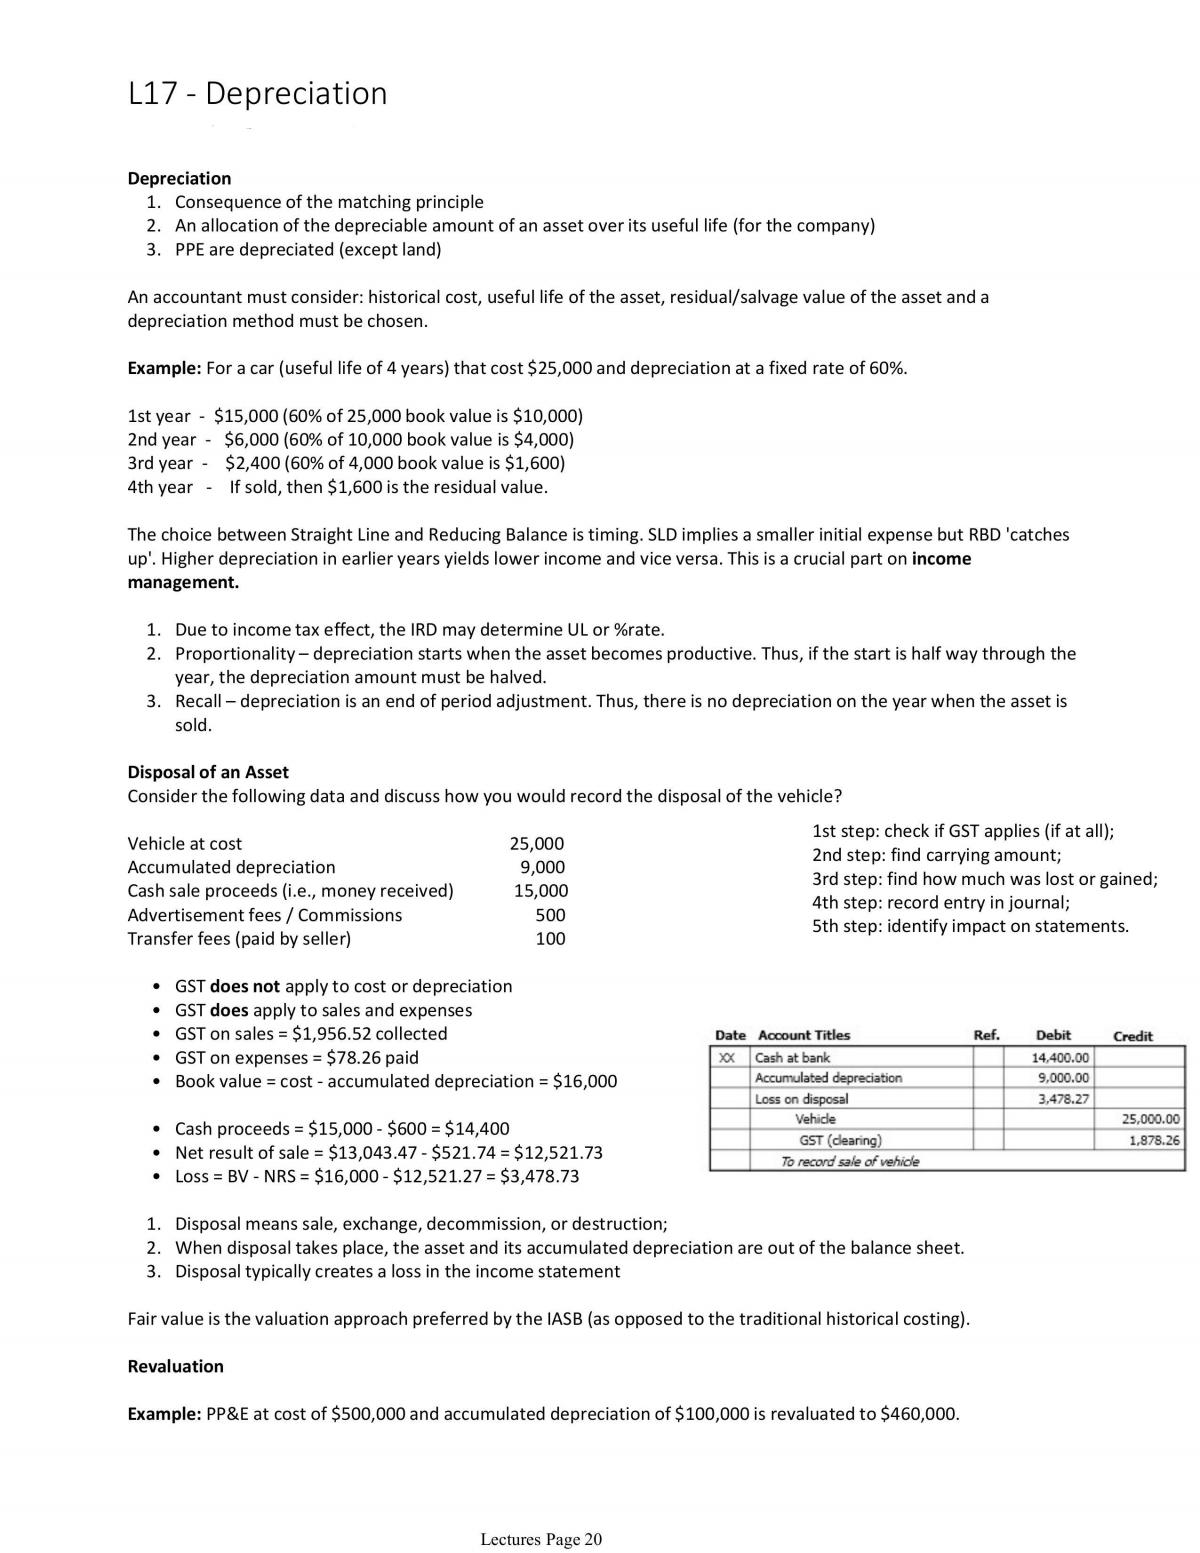 Principles of Accounting Study Notes - Page 20